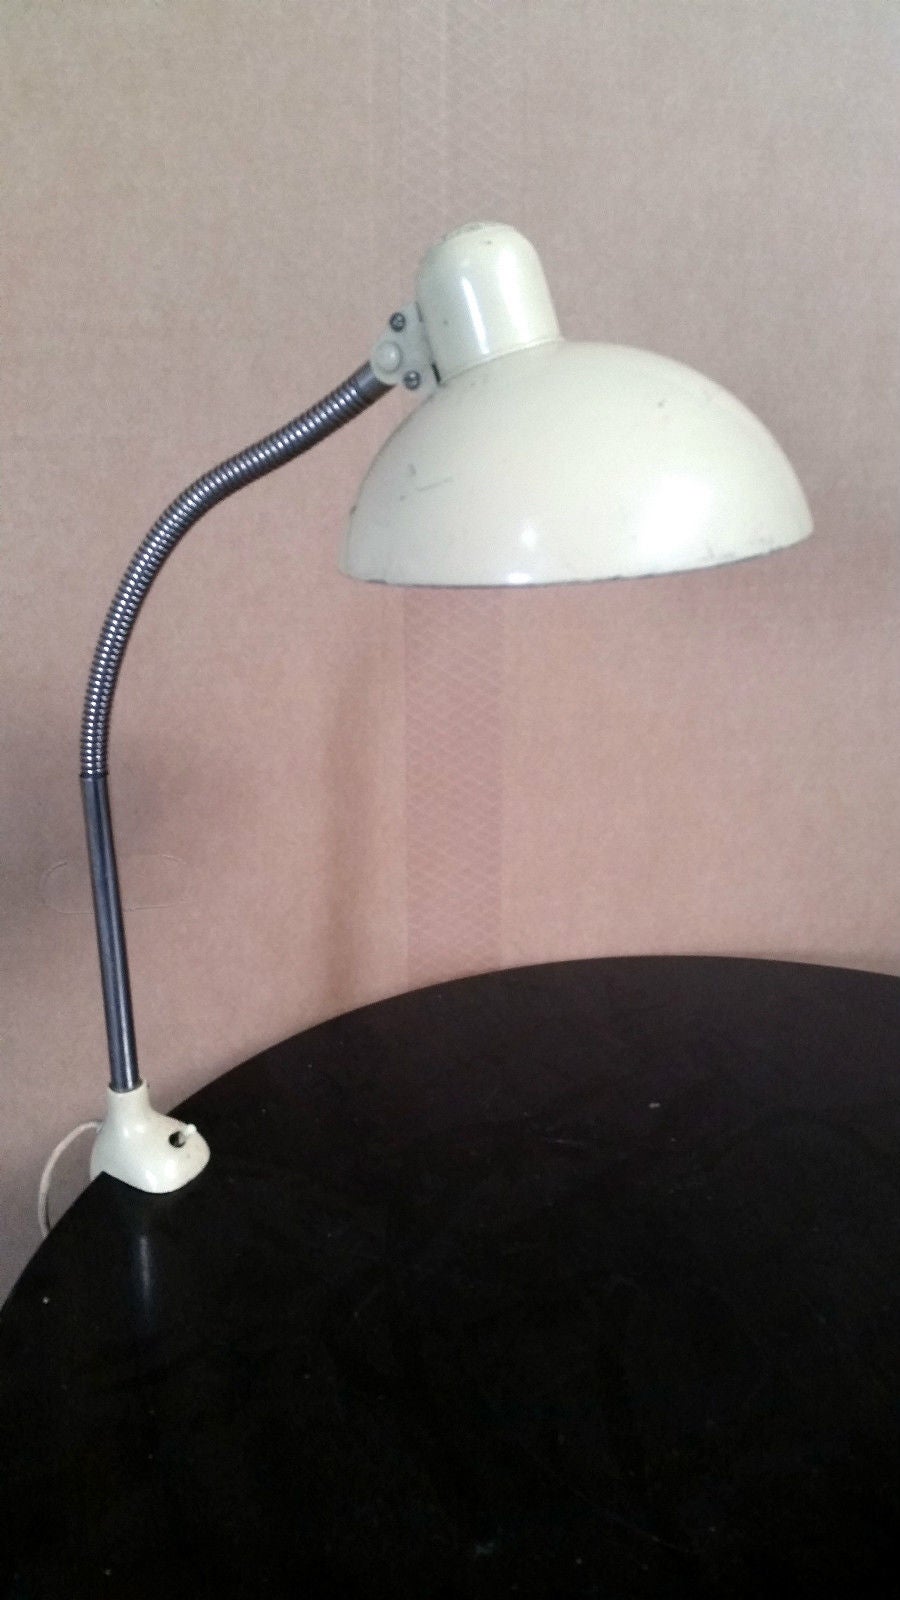 German Kaiser Idell 6740 white clamp table lamp from about 1920-1930's